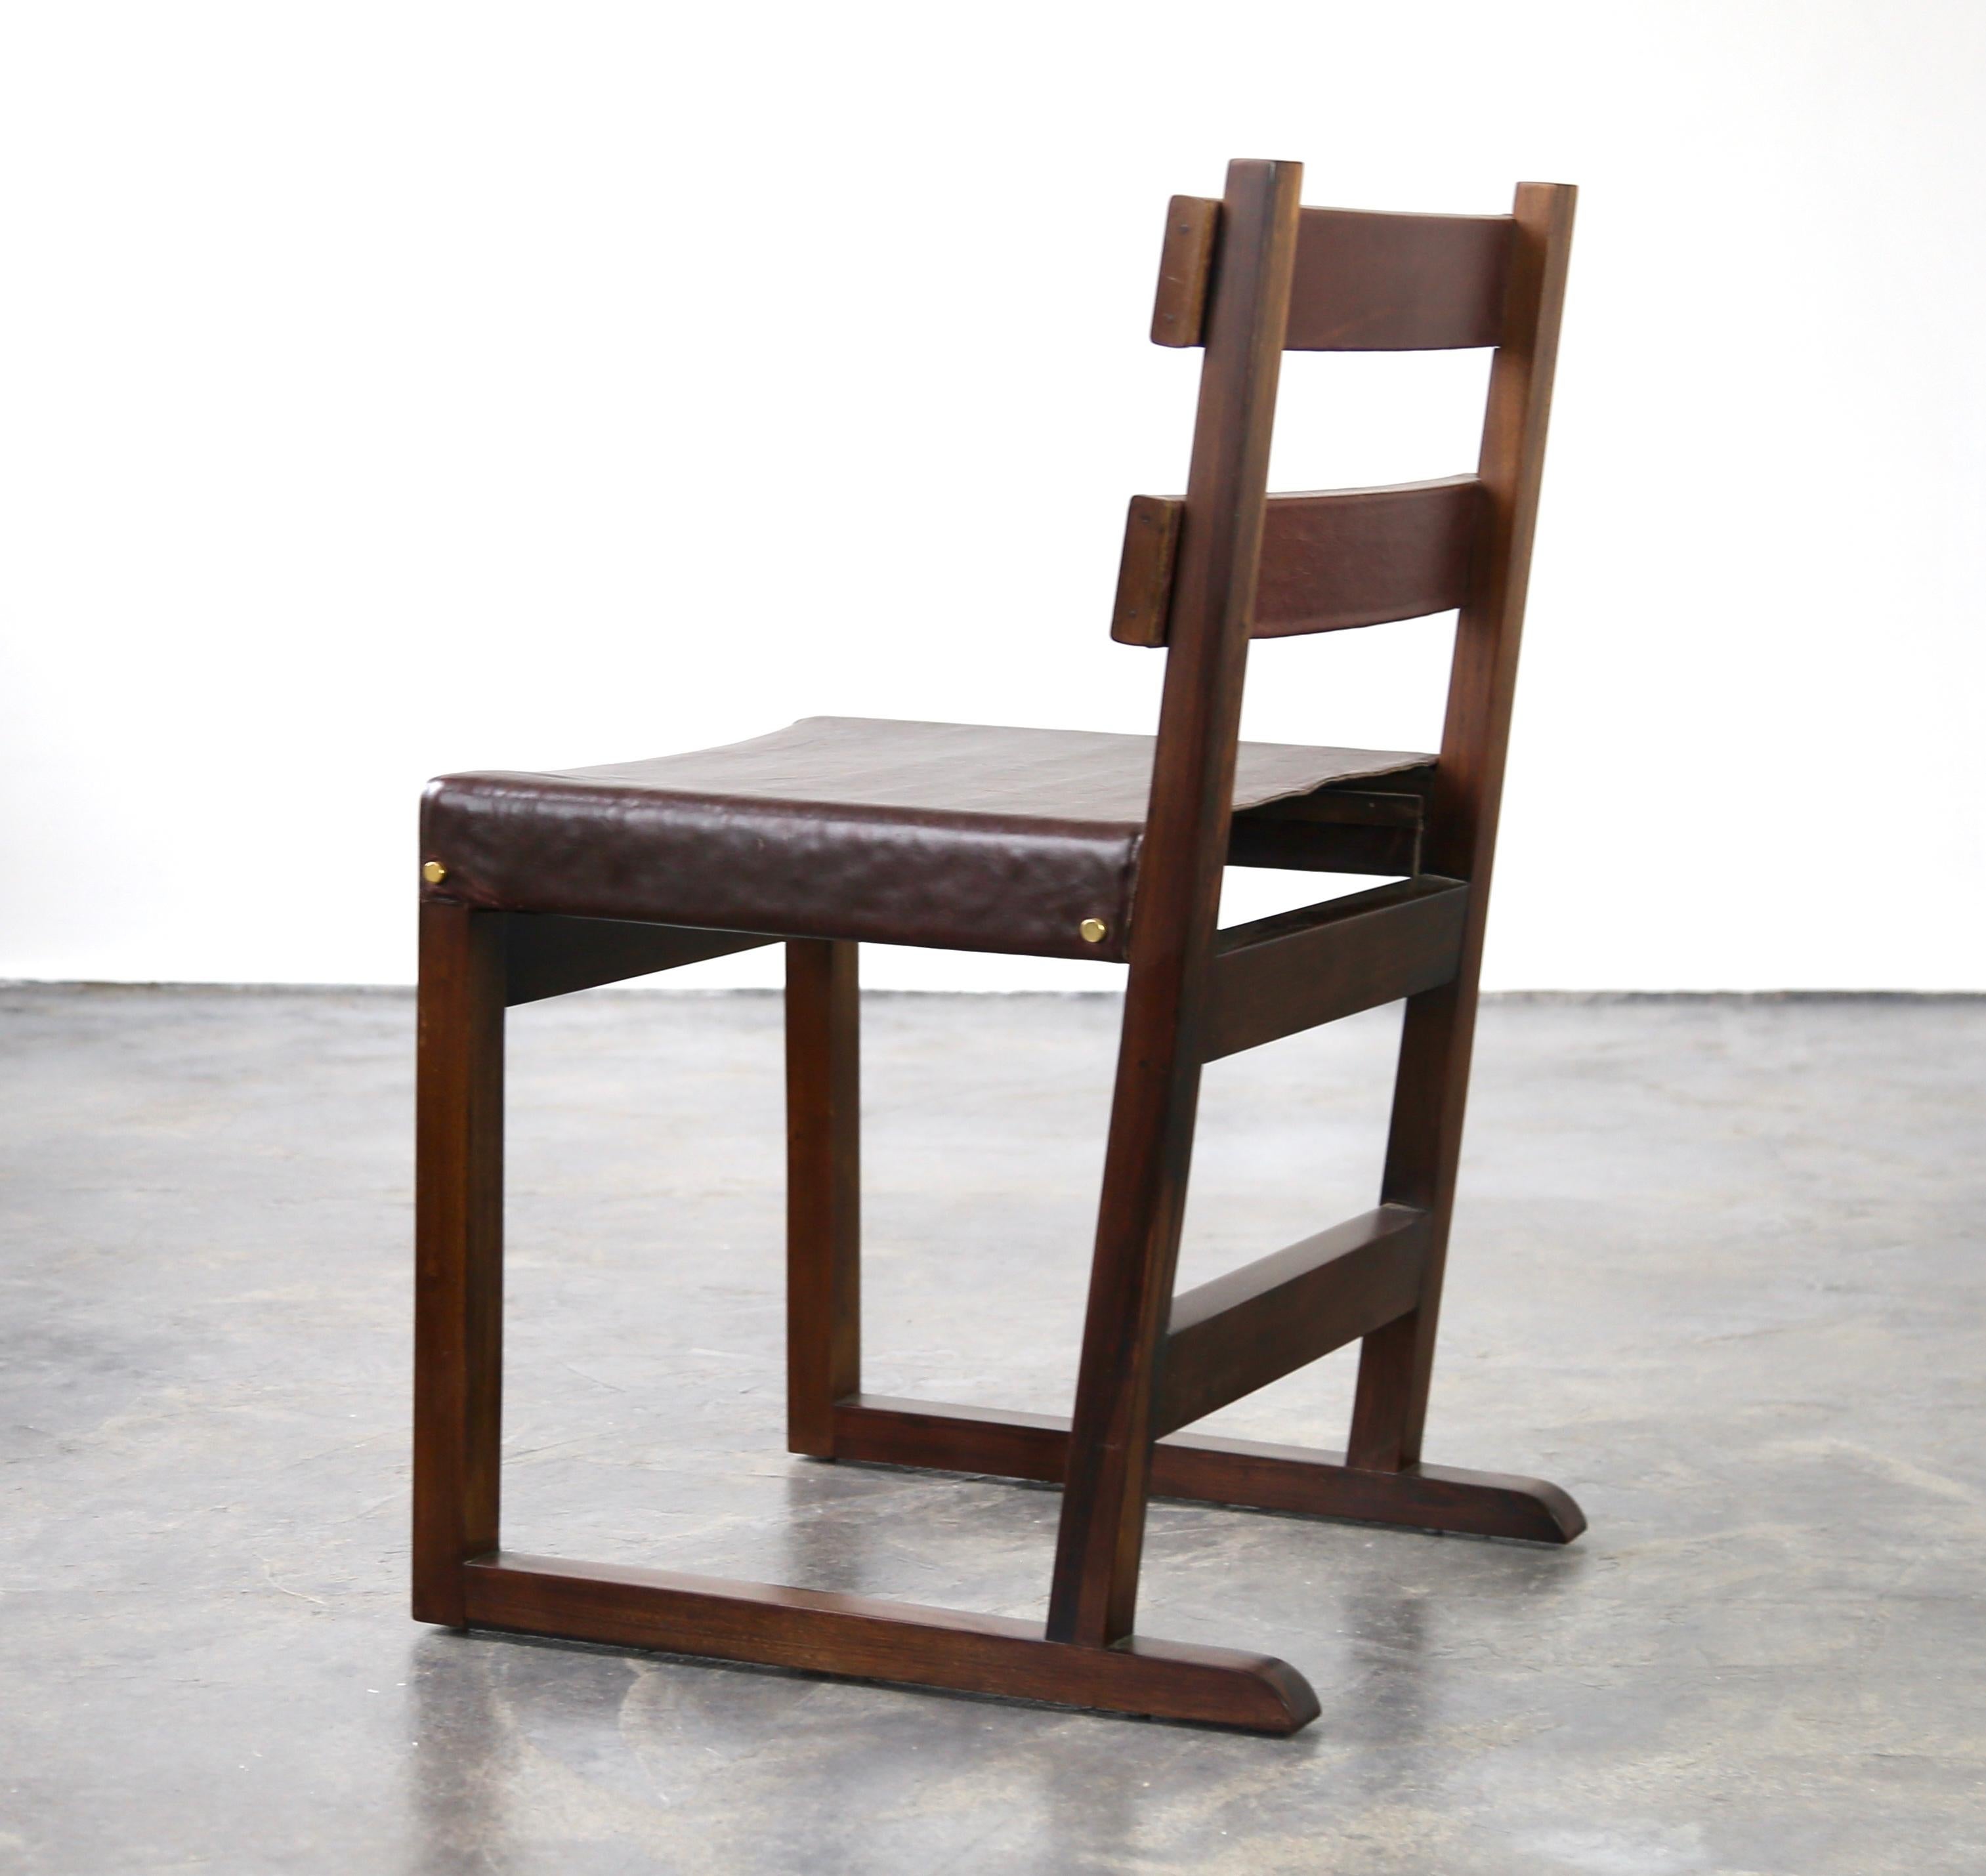 Piero Slung and Wrapped Leather Slatted-Back Chair from Costantini

Measurements are: 19